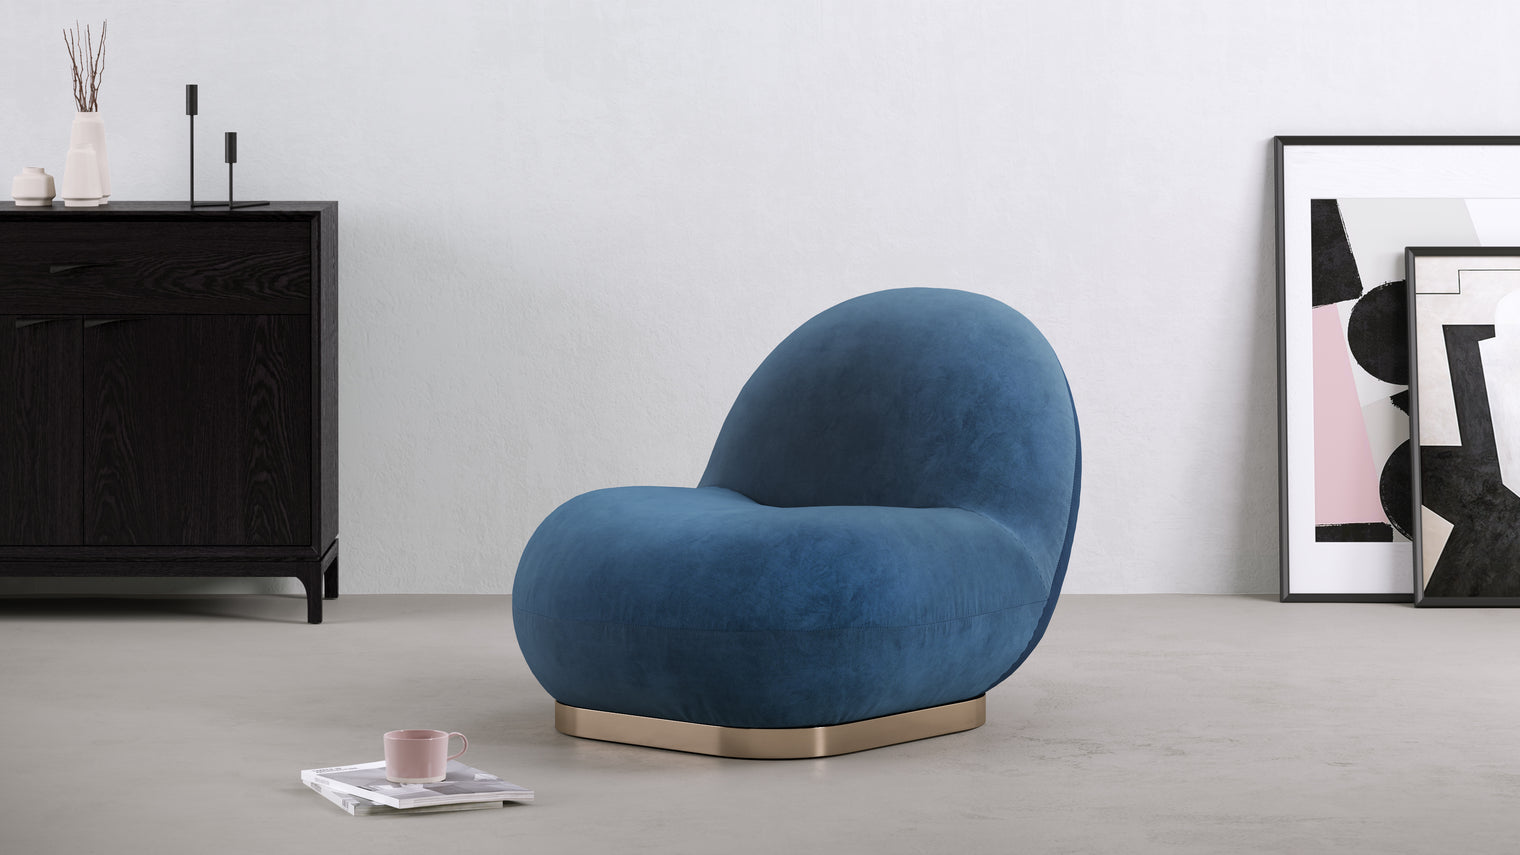 Sitting in the Clouds|Like sitting on clouds, the Palais chair combines organic shapes and an ergonomic design to provide a relaxed yet modern silhouette.
